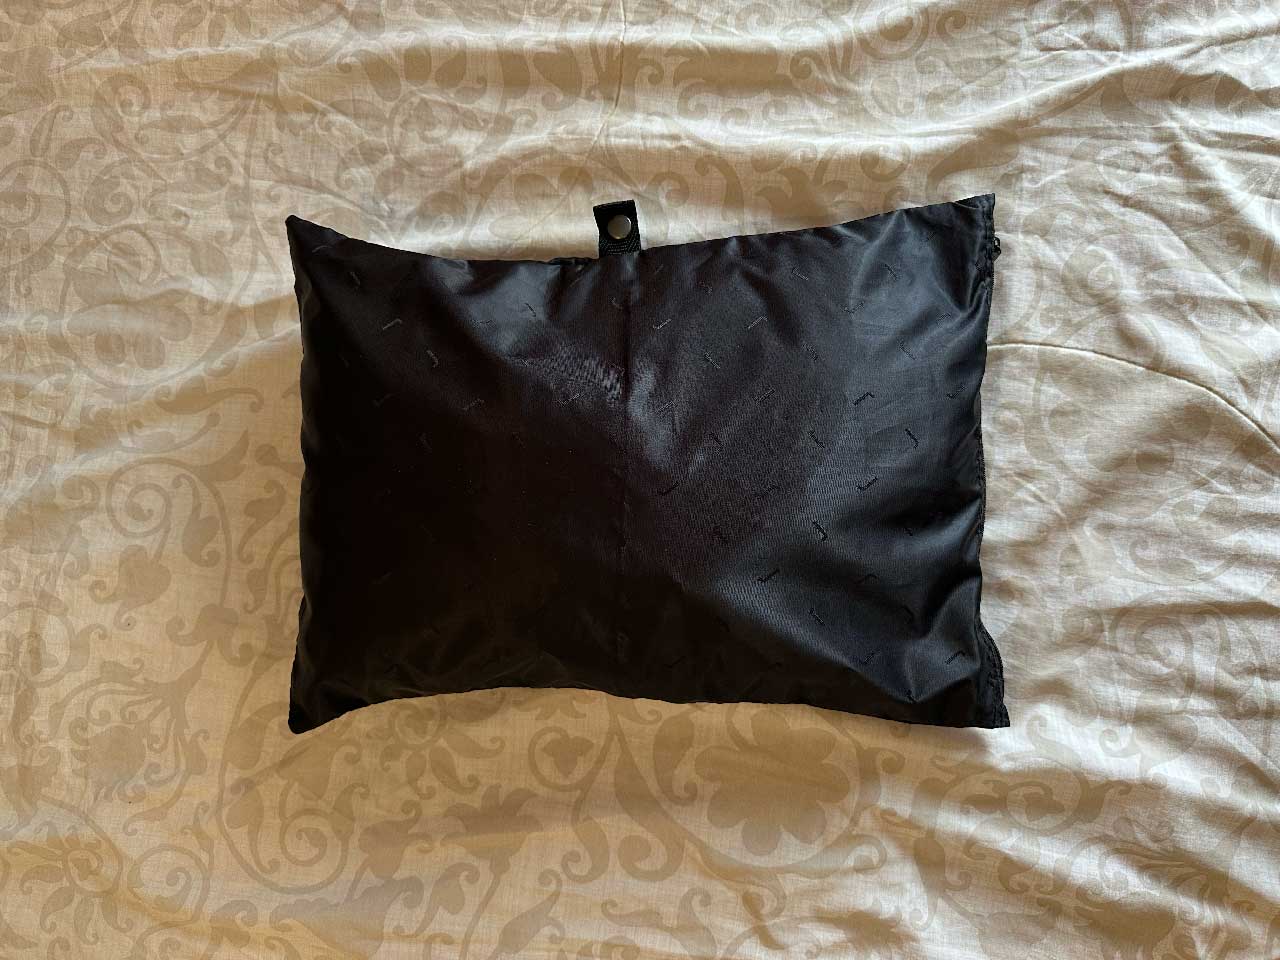 Using the Laundry bag to hold dirty clothes at my hotel